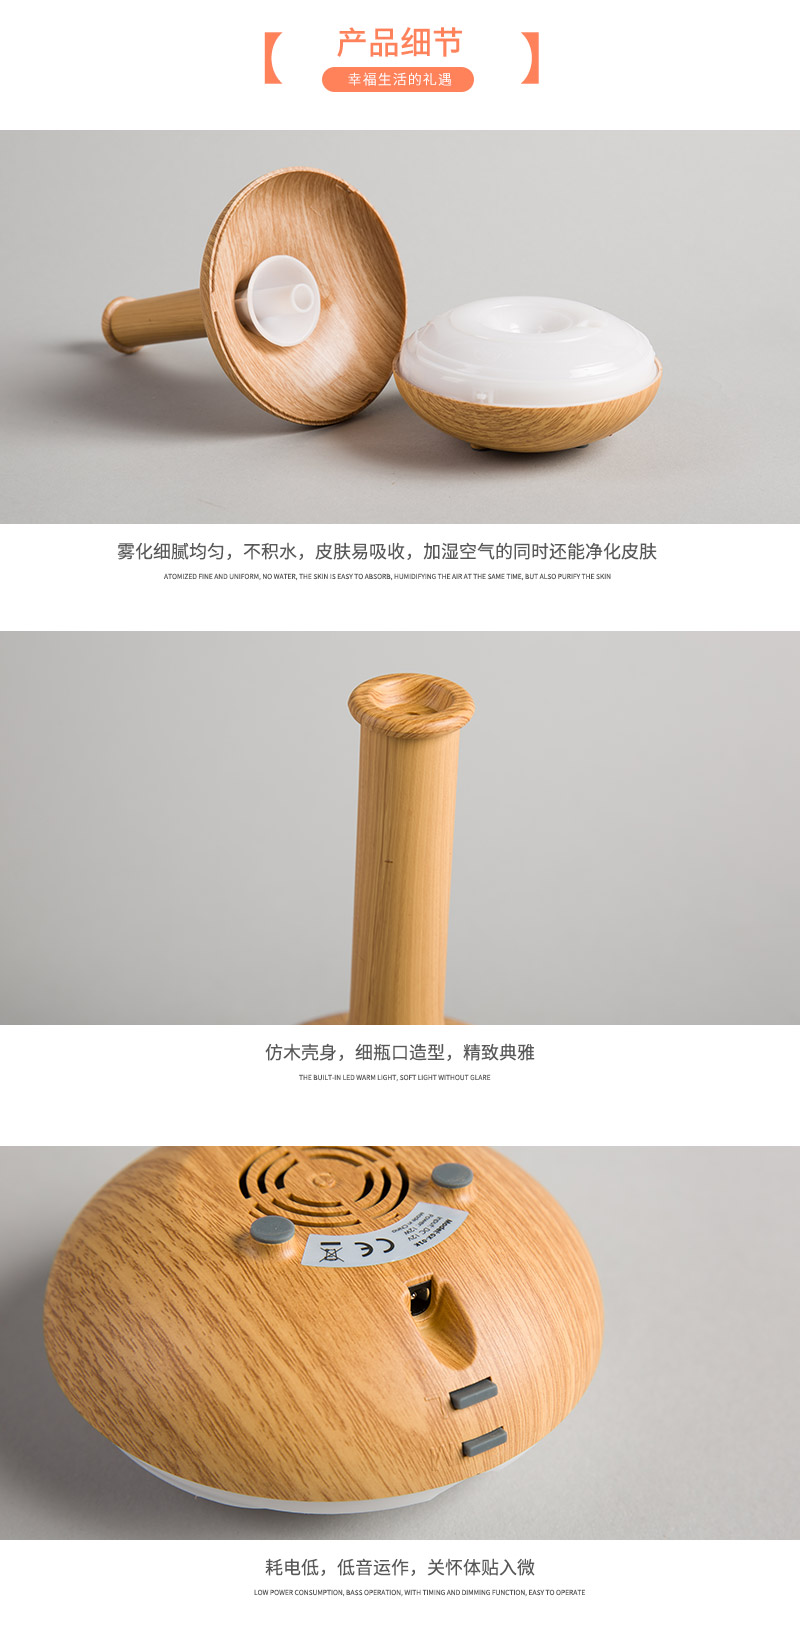 01K light wood color humidifier5